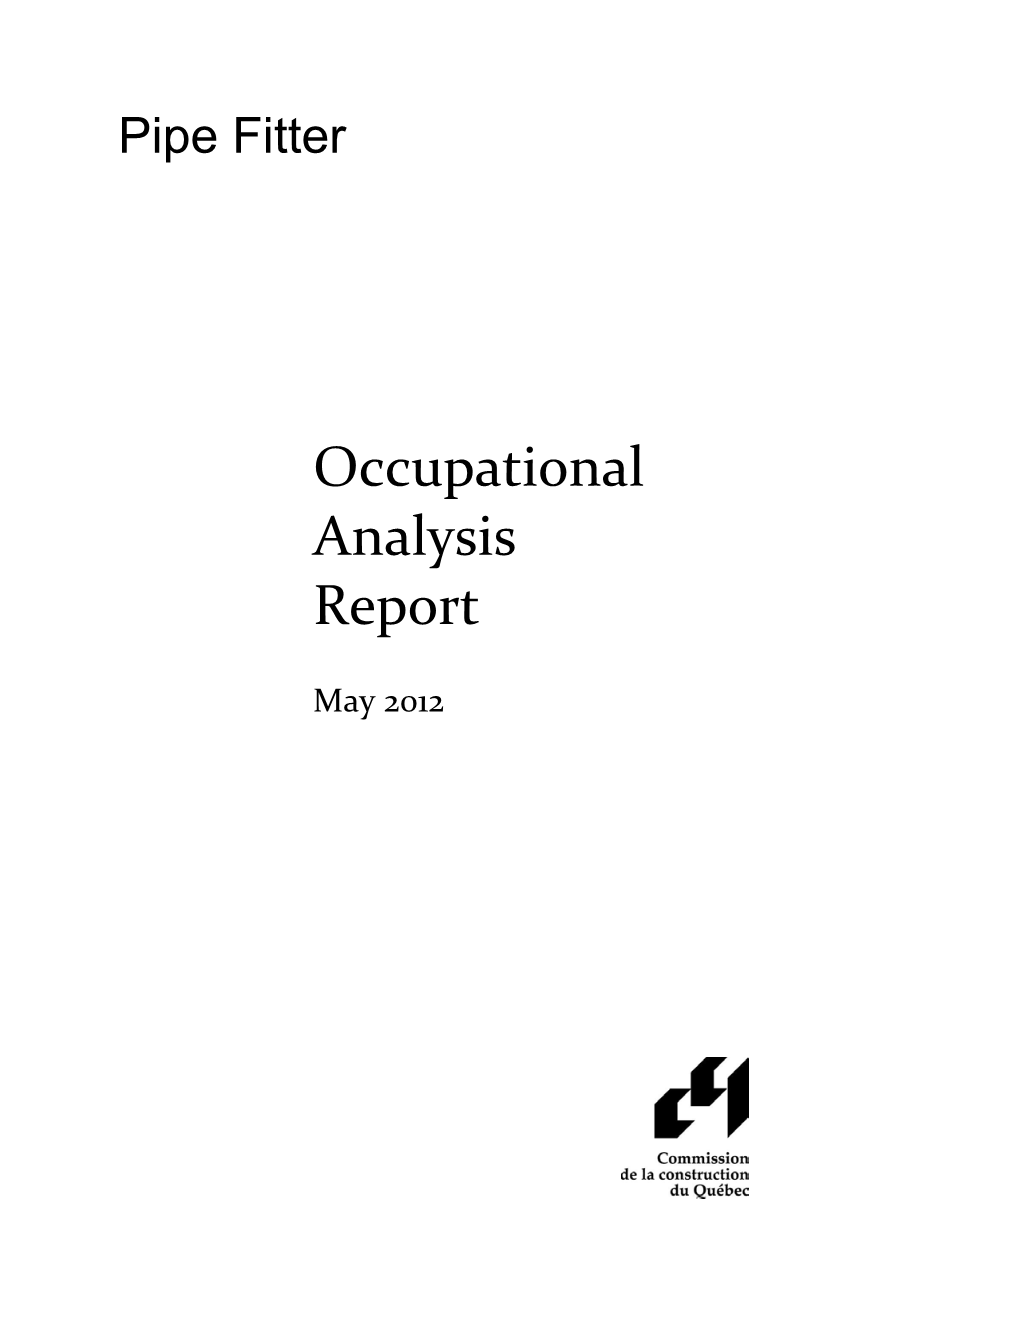 Occupational Analysis Report